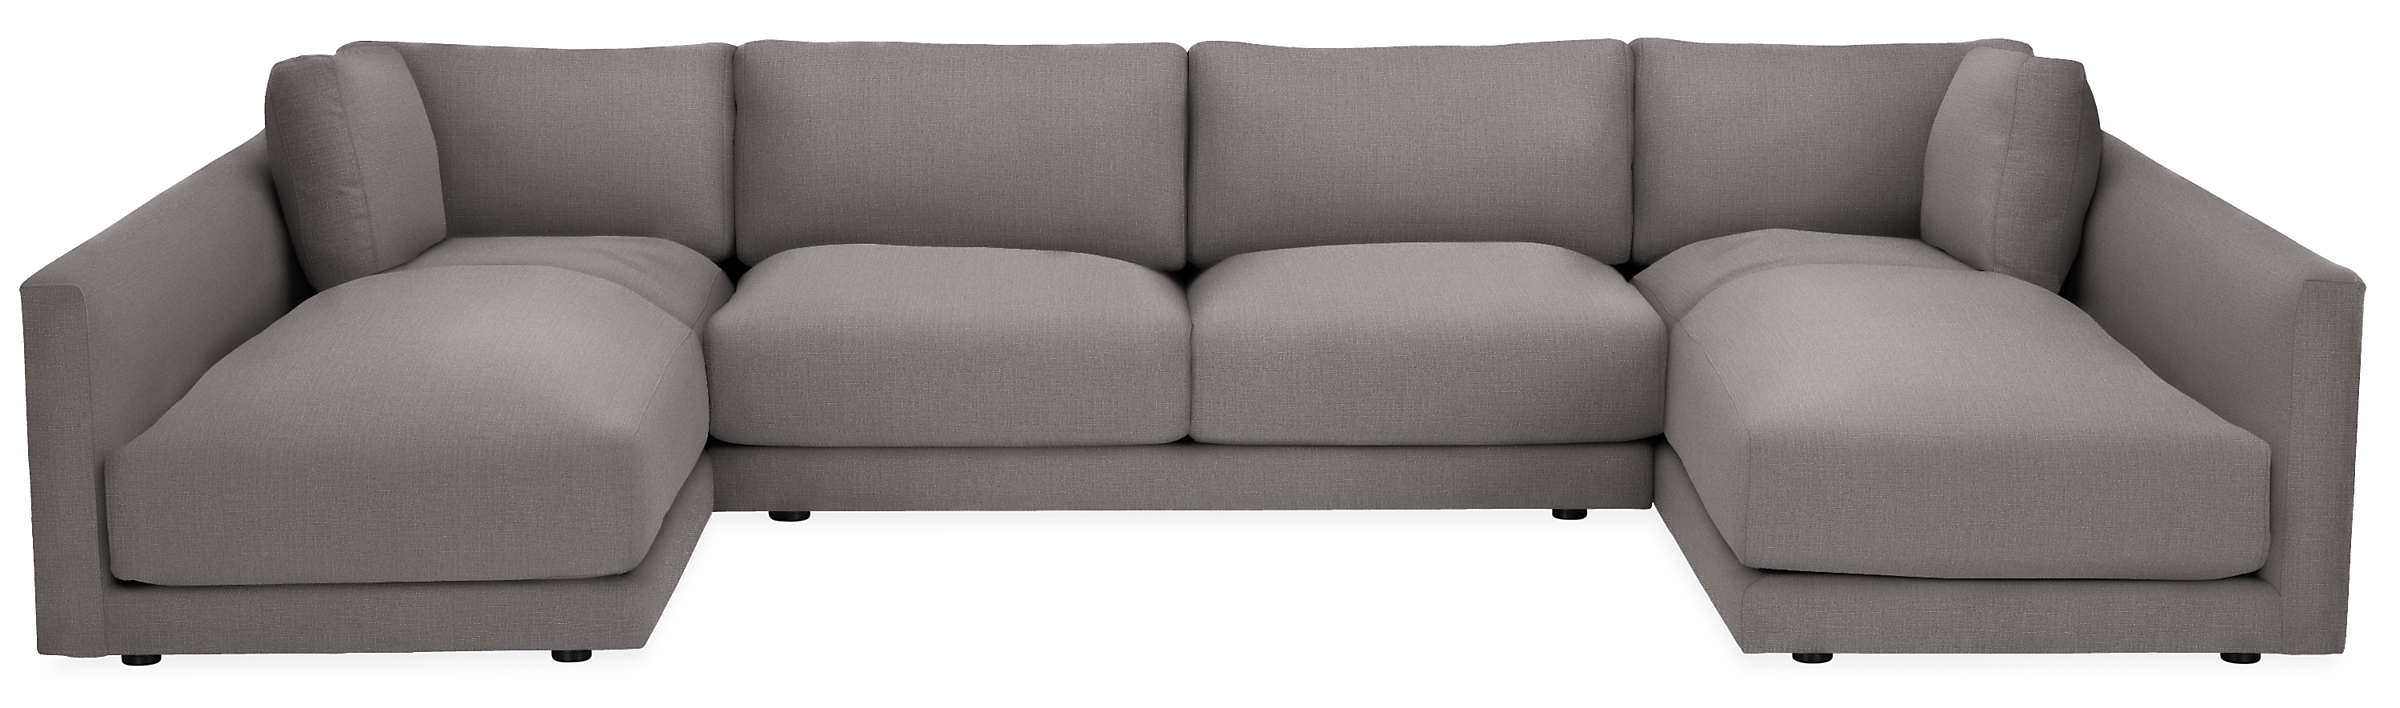 Clemens 140x74" Three-Piece U-Shaped Sectional